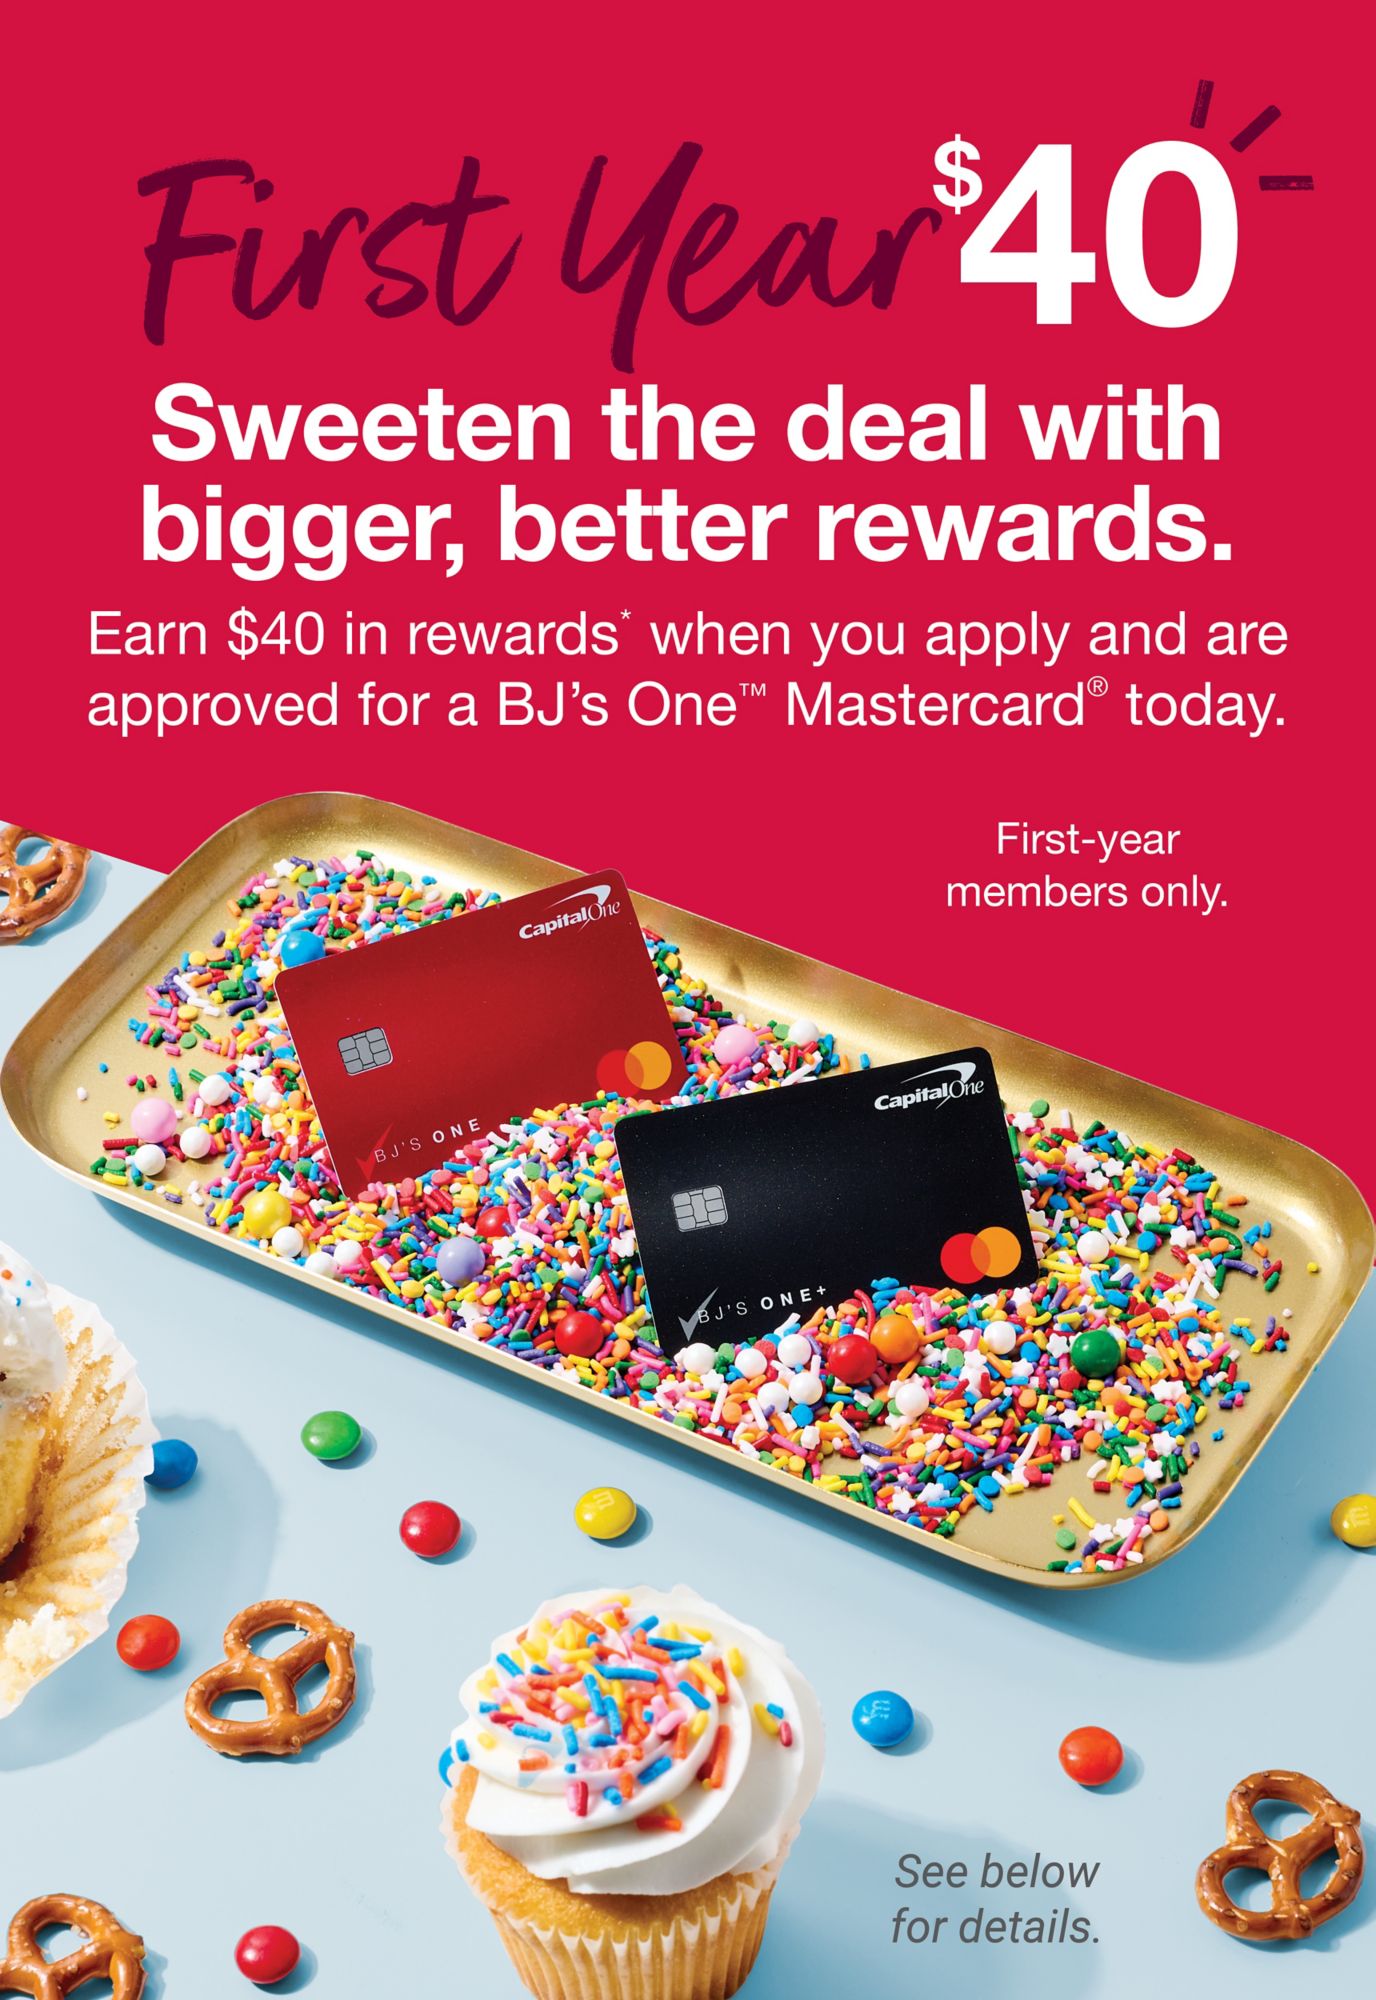 First year $40. Sweeten the deal with bigger, better rewards. Earn $40 in rewards* when you apply and are approved for a BJ's One® Mastercard today. First-year members only. See below for details